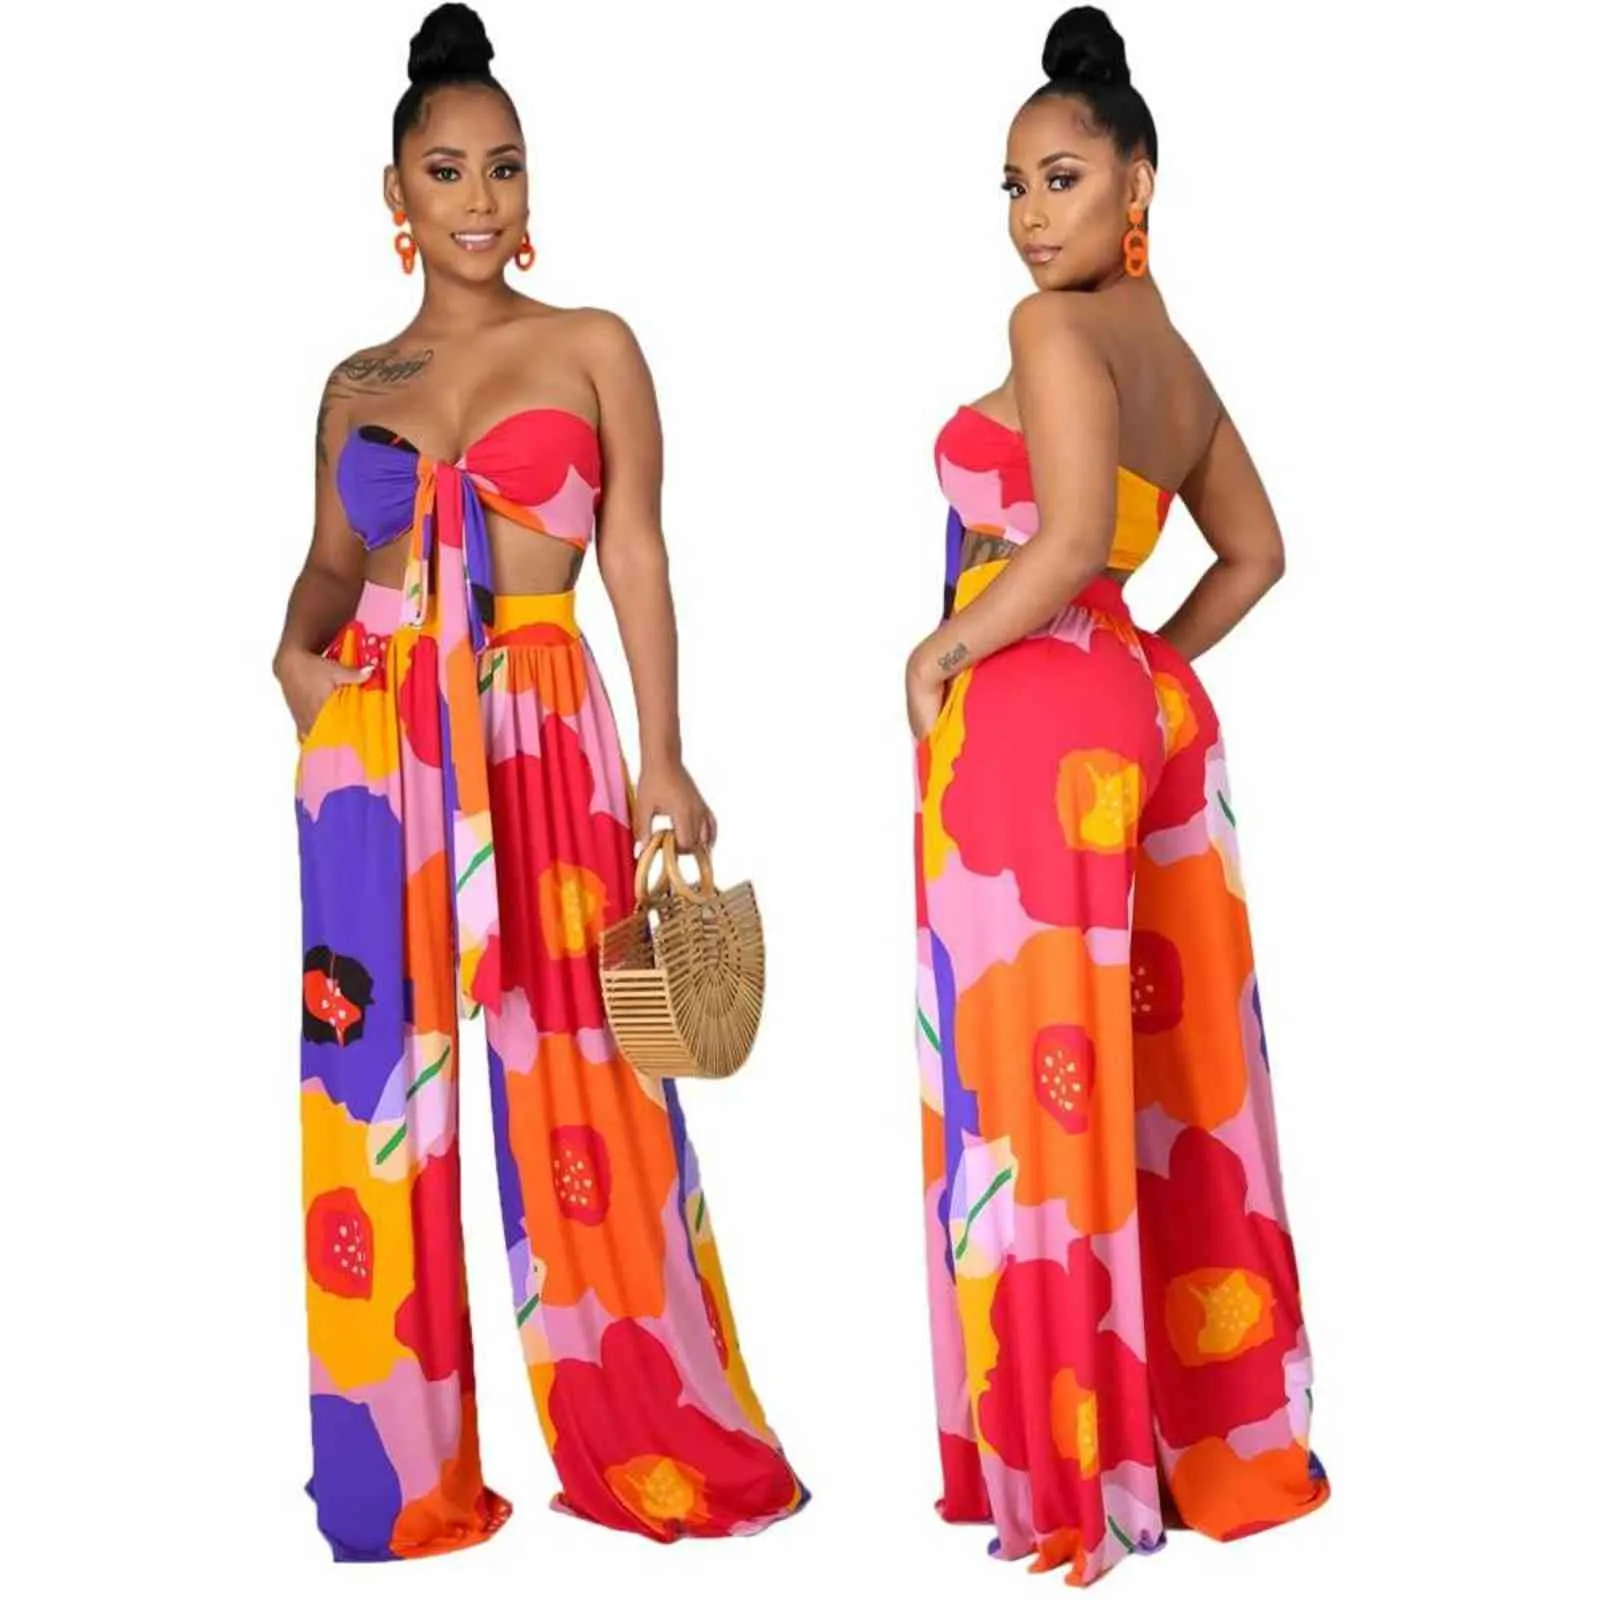 S-XL Pantsuit Ladies Backless Top + Bust Pants 2 Piece Fashion Print Loose Dashiki Sexy 2 Piece Set 2021 Summer Casual New